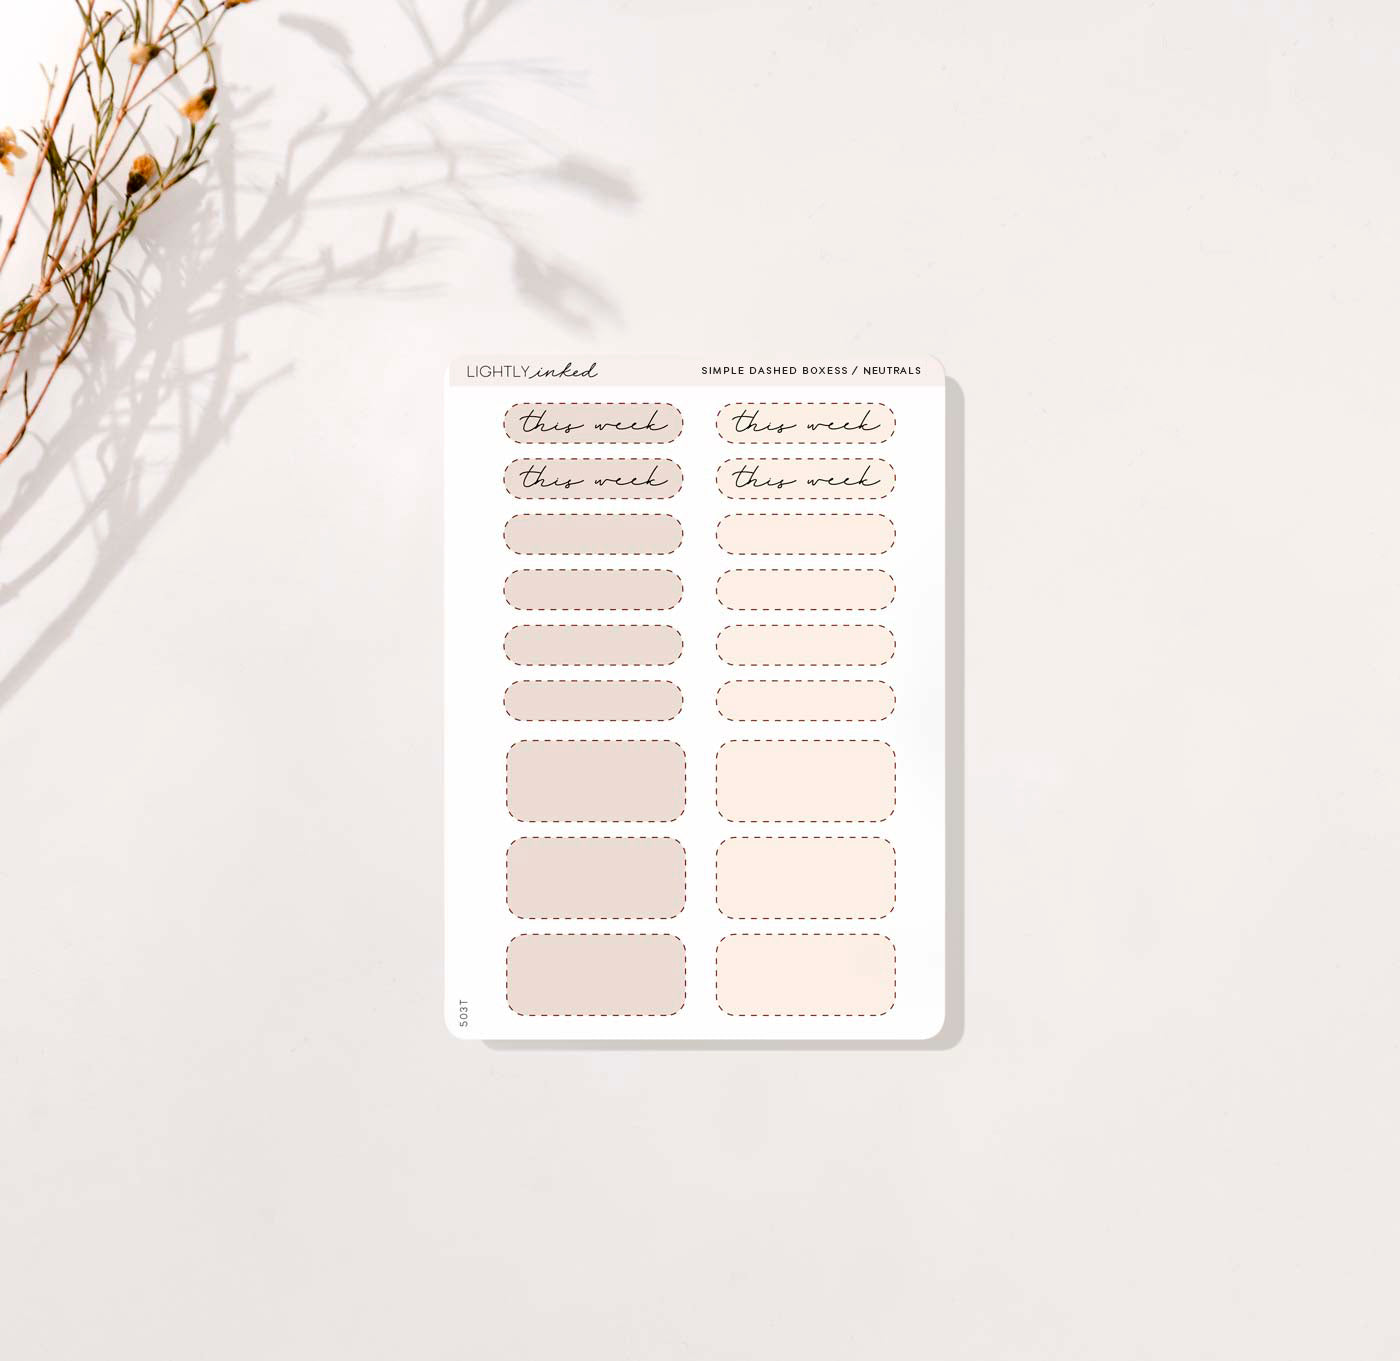 Simple Dashed Boxes / Neutrals